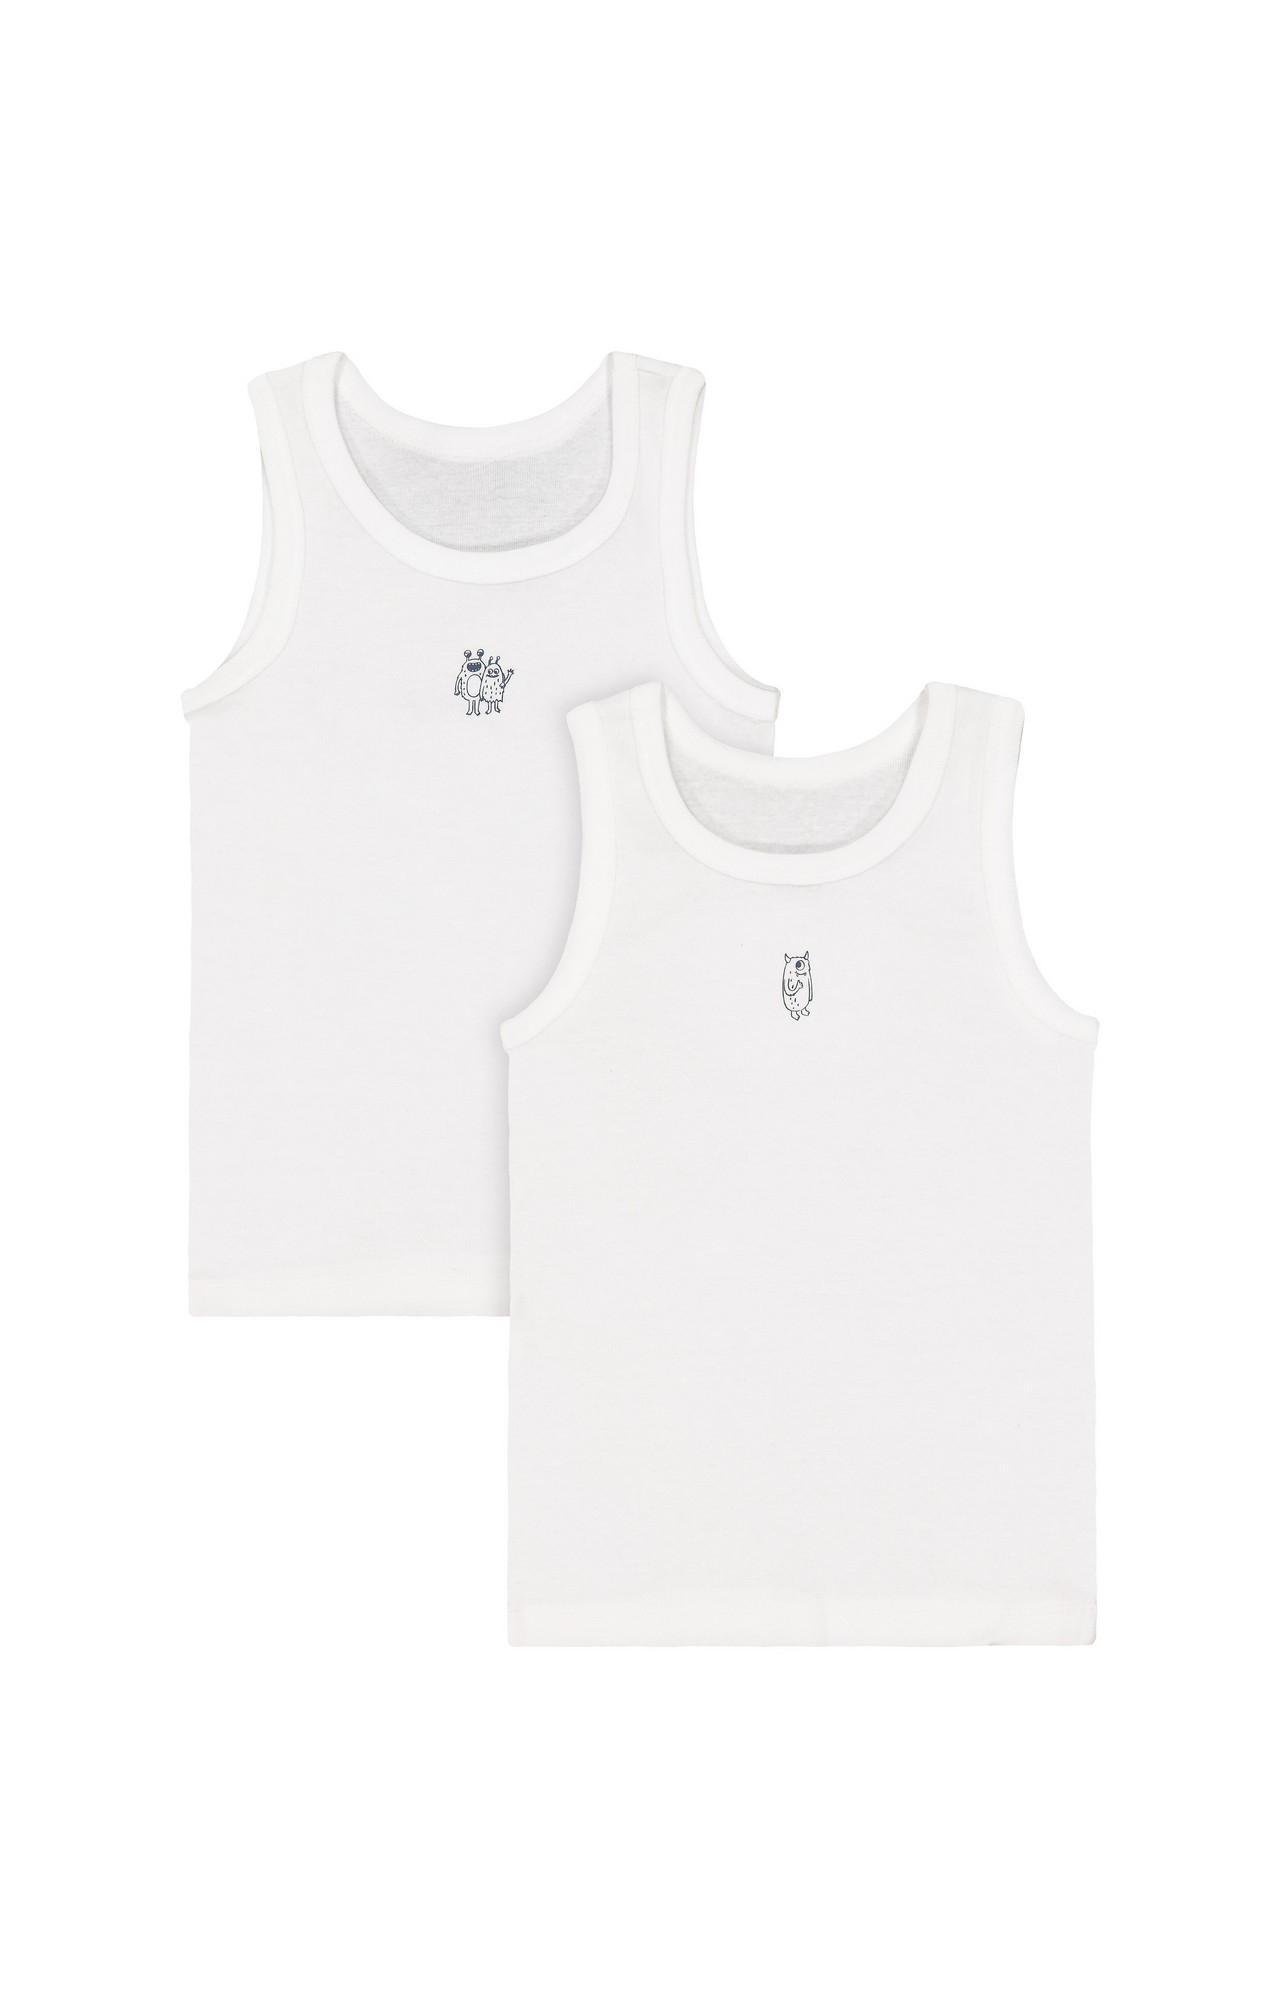 Mothercare | White Printed Vest - Pack of 2